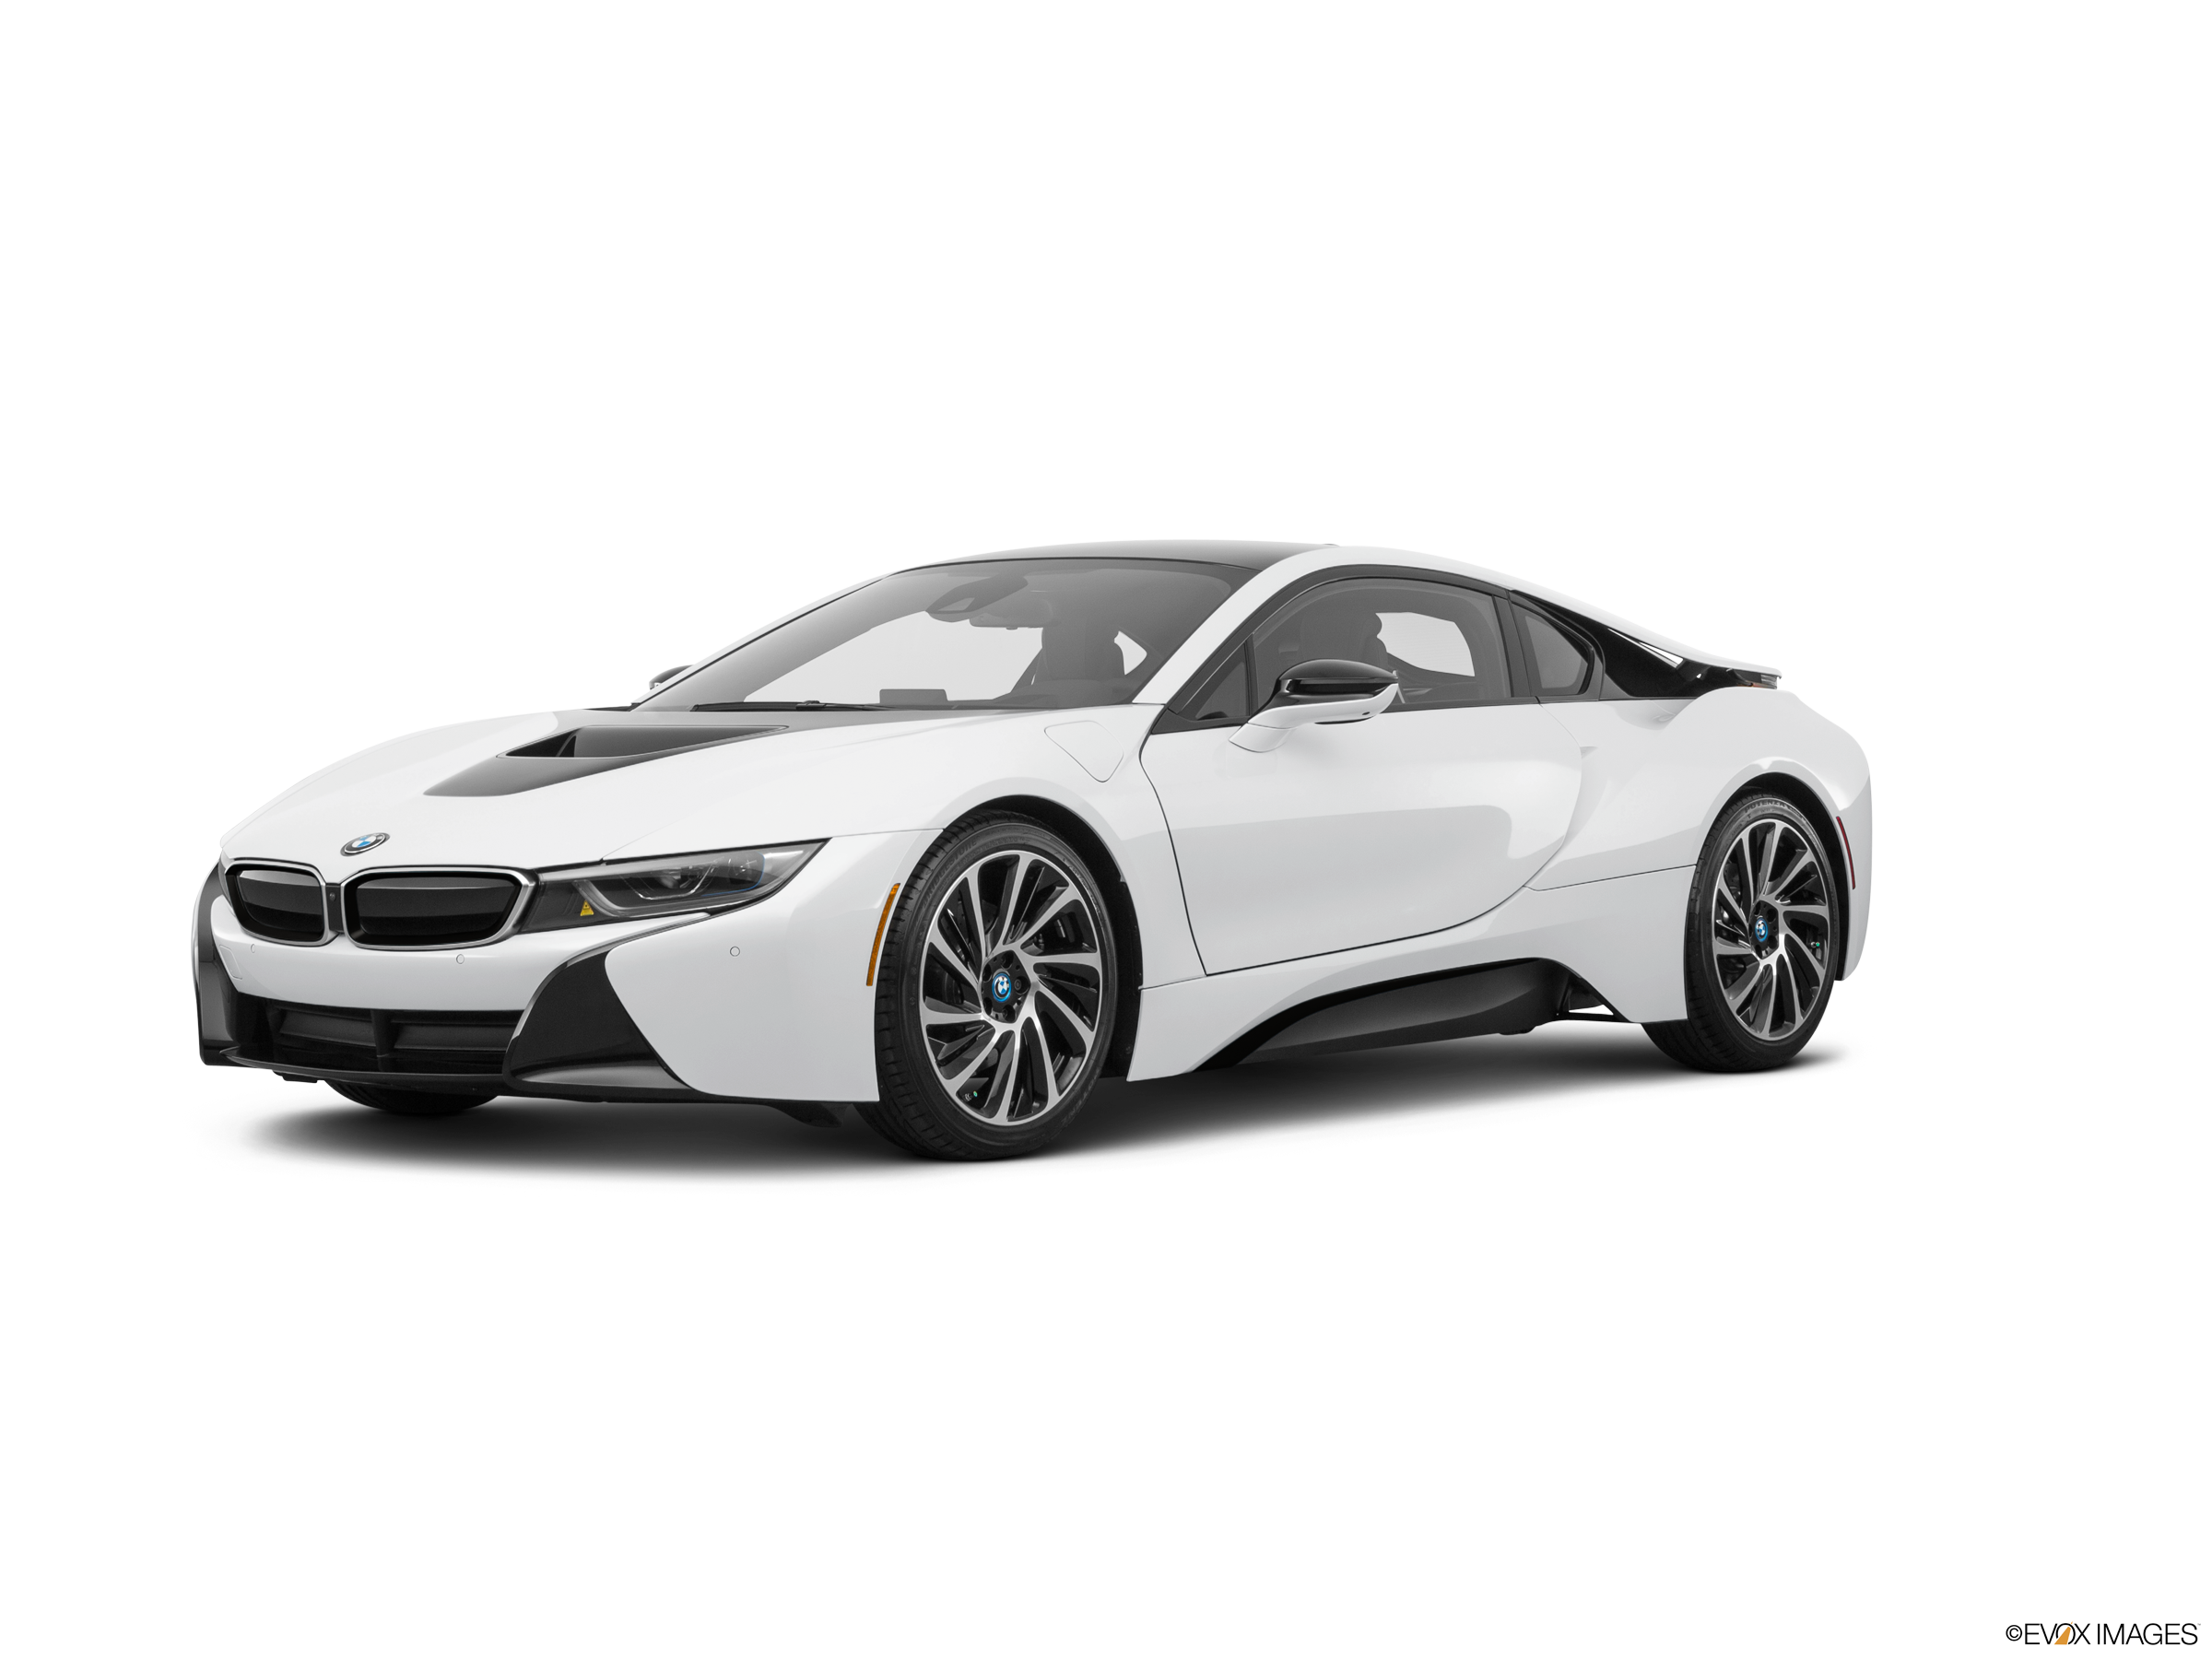 2017 Bmw I8 Price, Value, Ratings & Reviews | Kelley Blue Book